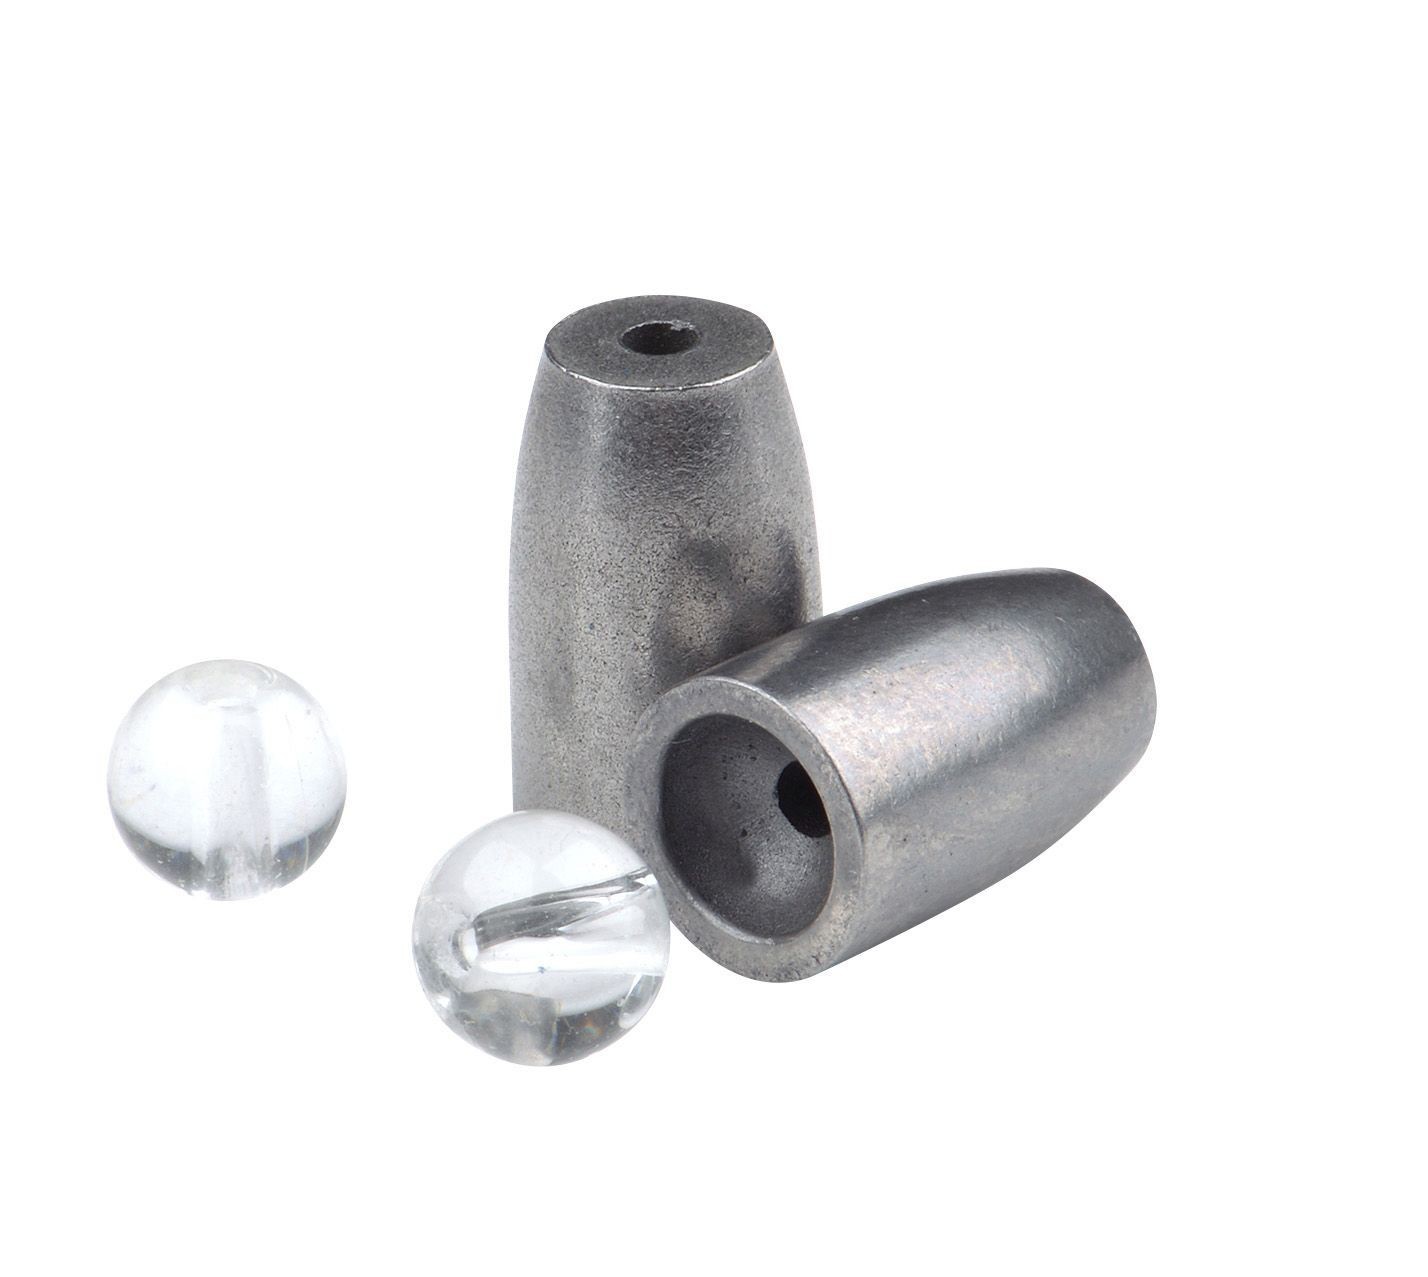 Груз SPRO Stainless Steel DS Sinkers MS 5,3гр - фото 1